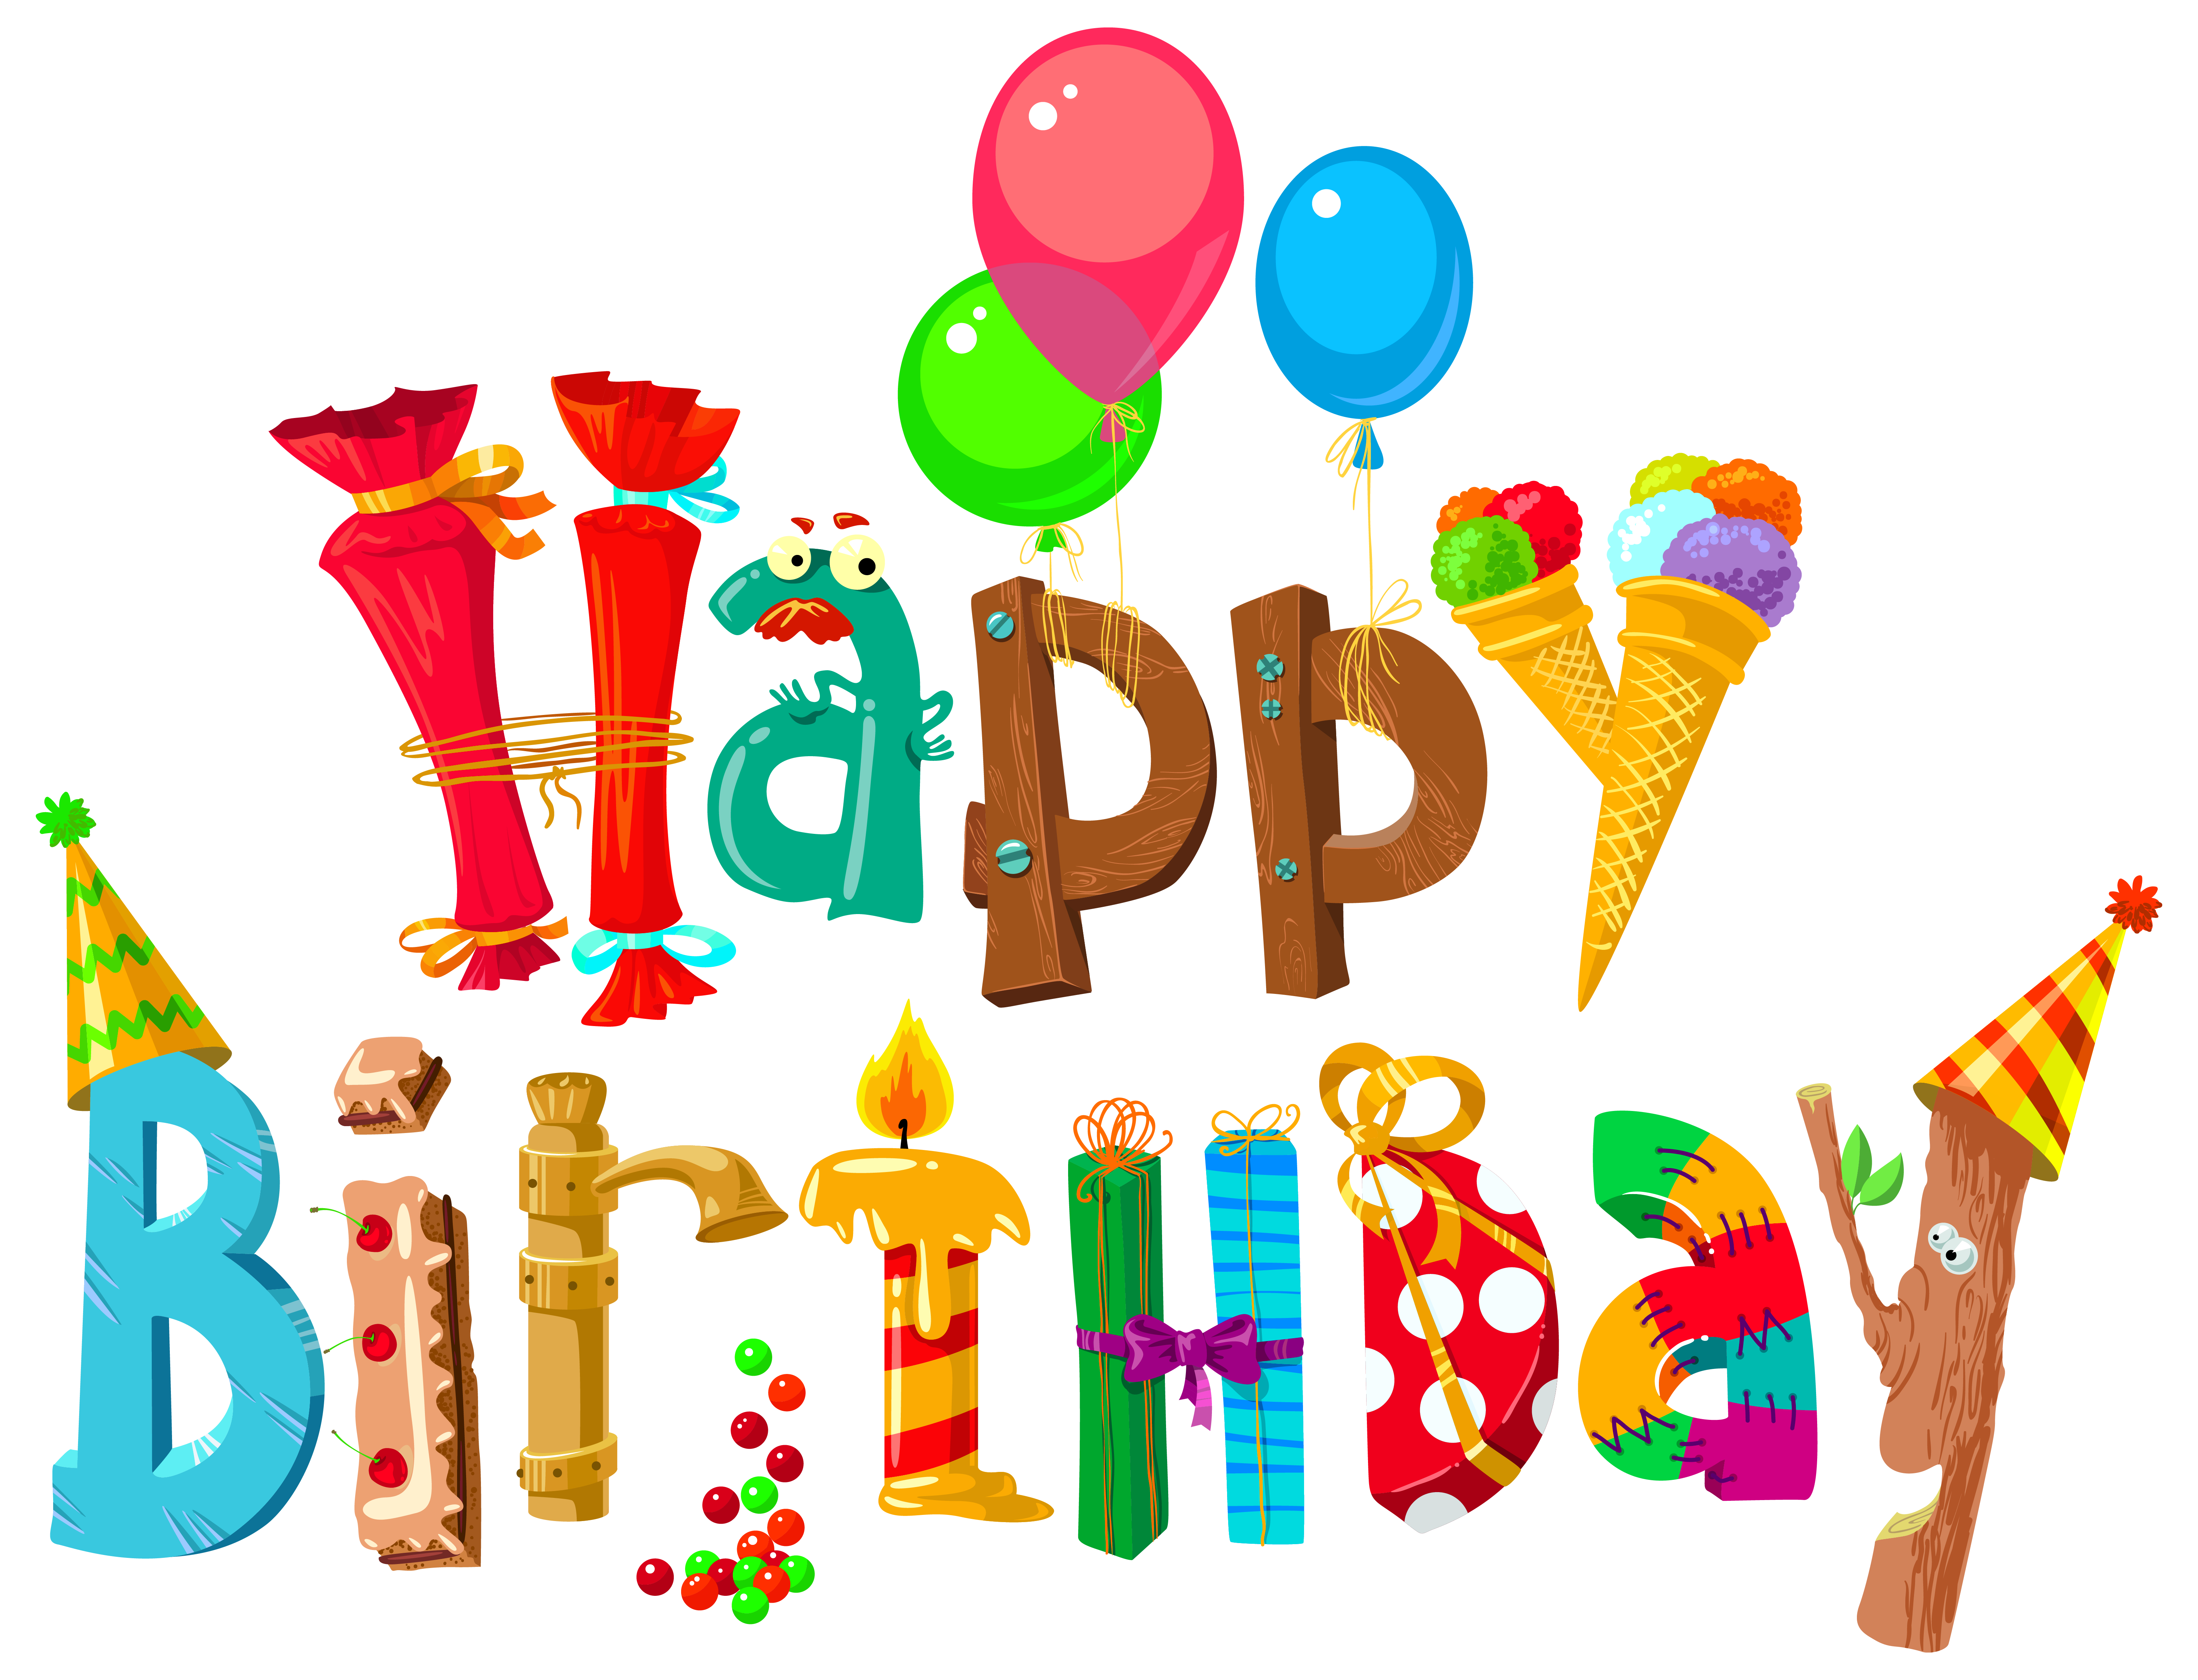 Birthday clipart. Funny happy image gallery